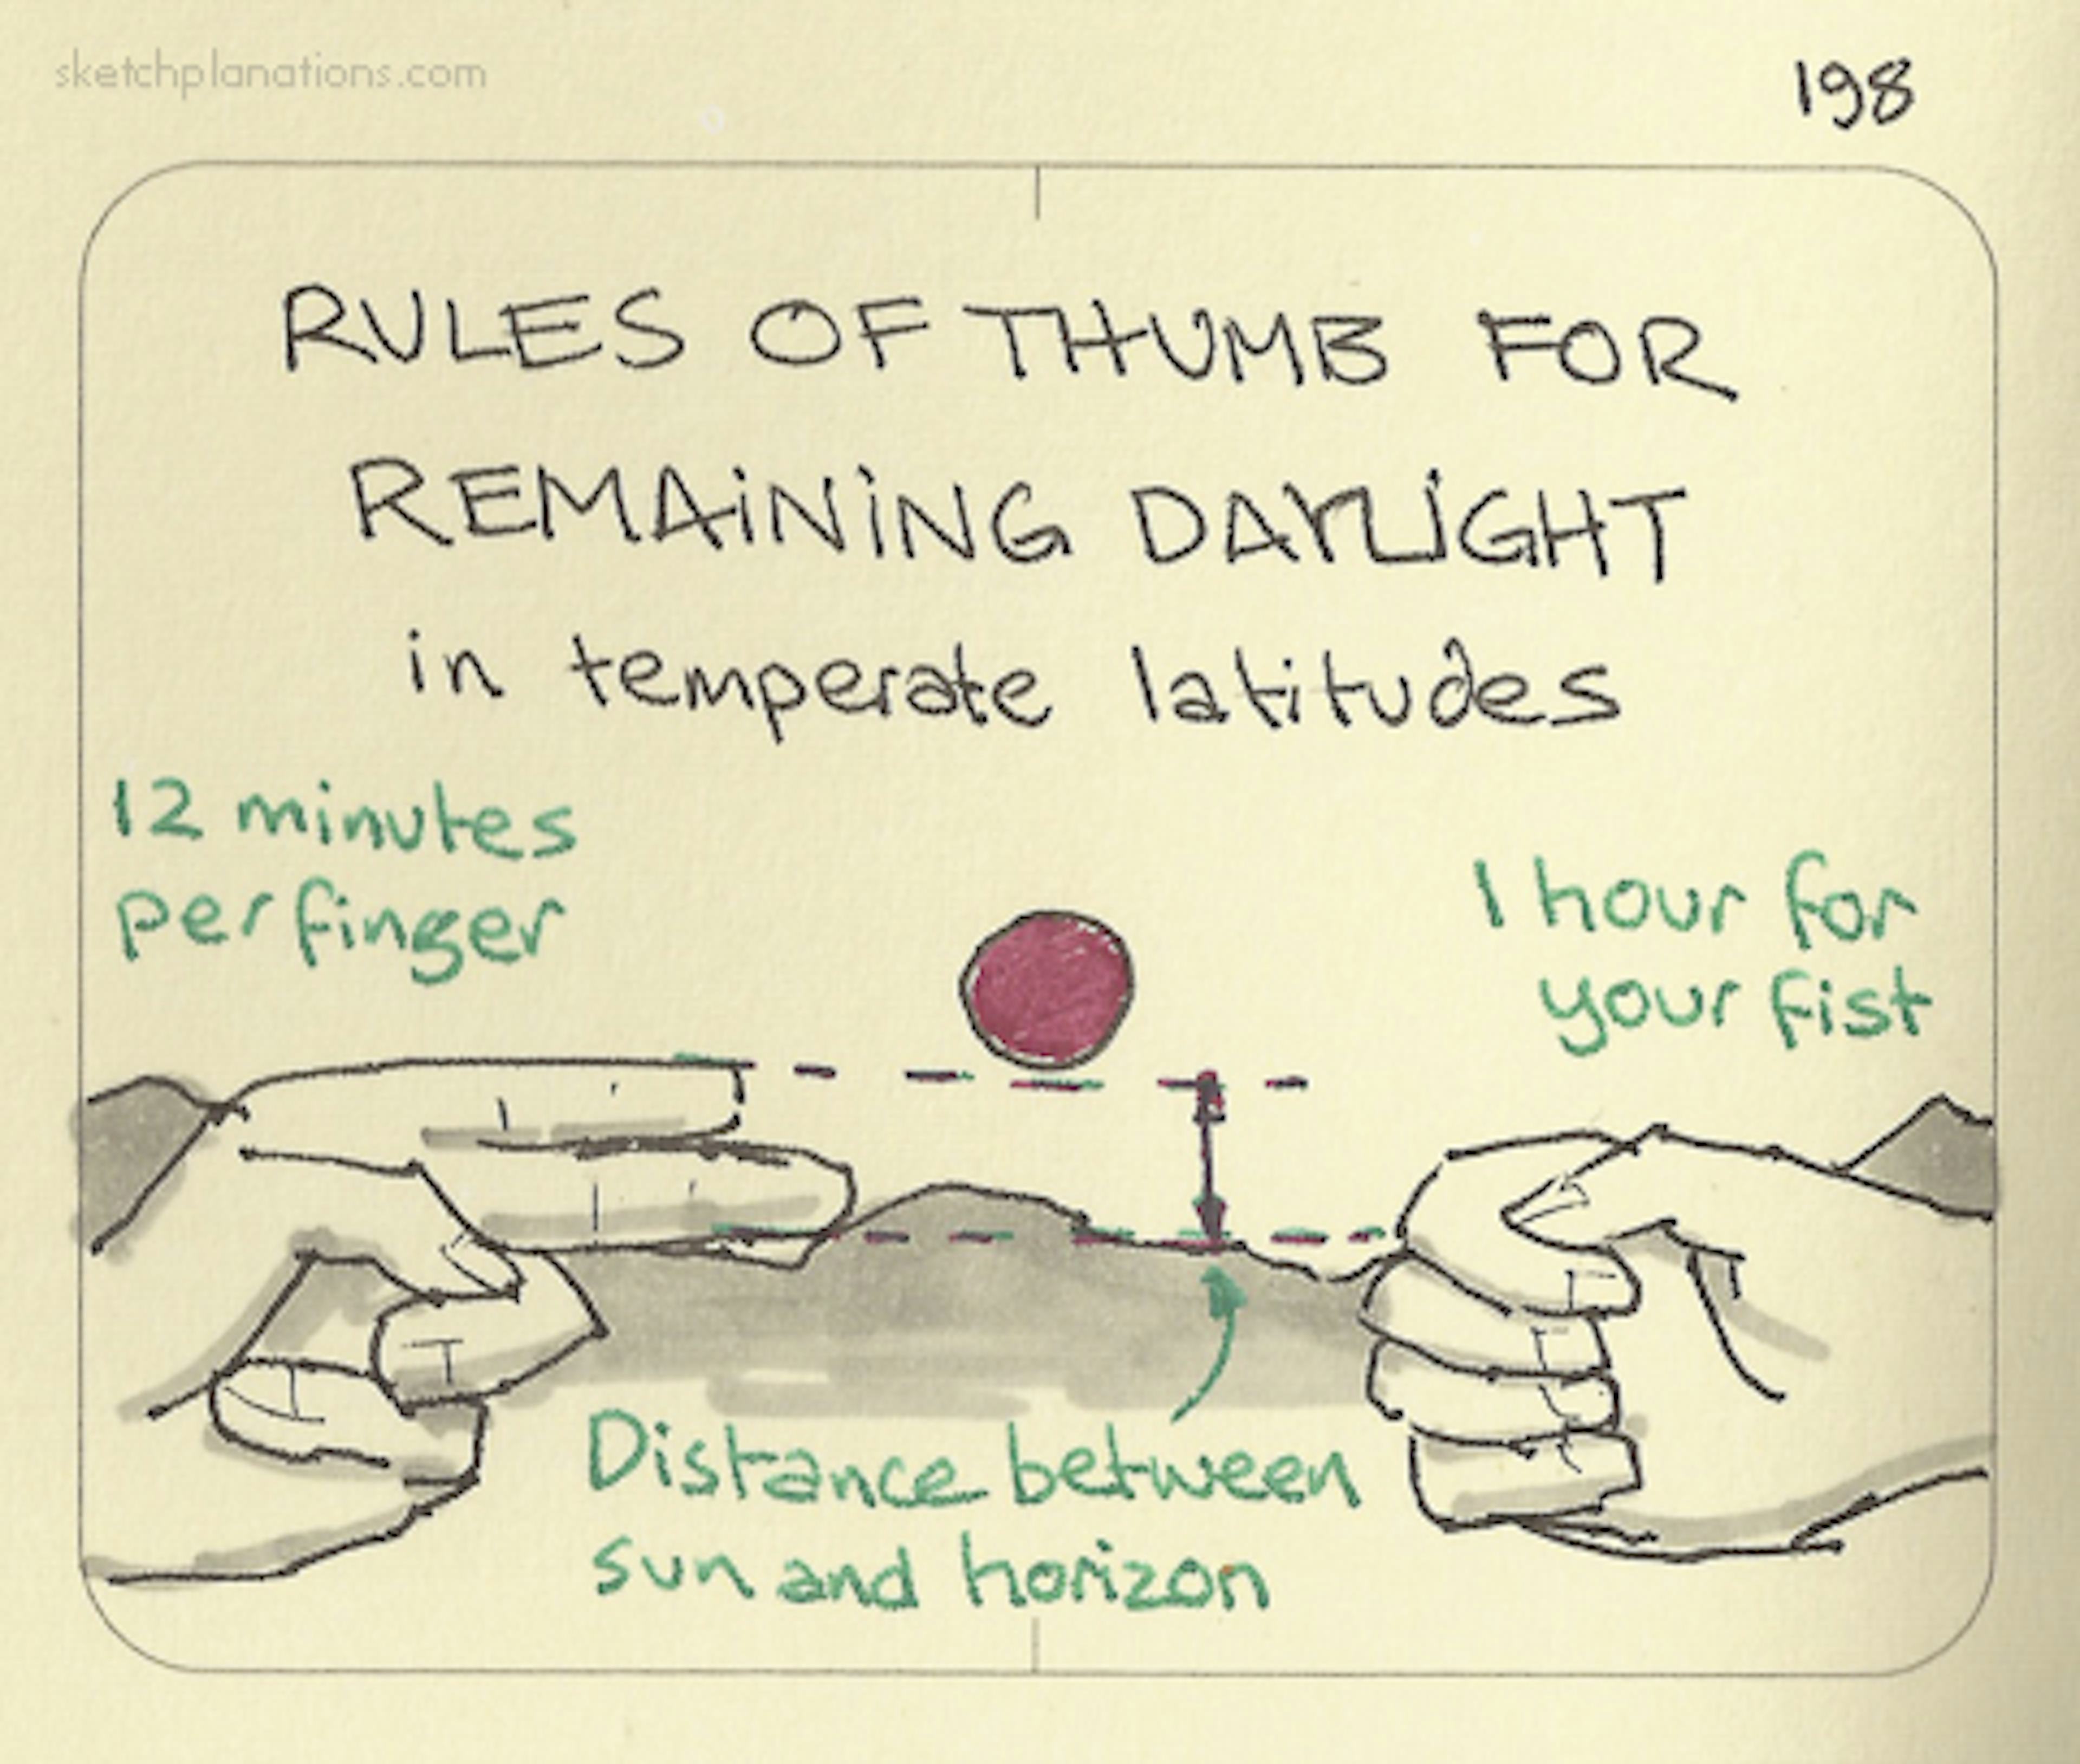 Rules of thumb for remaining daylight - Sketchplanations